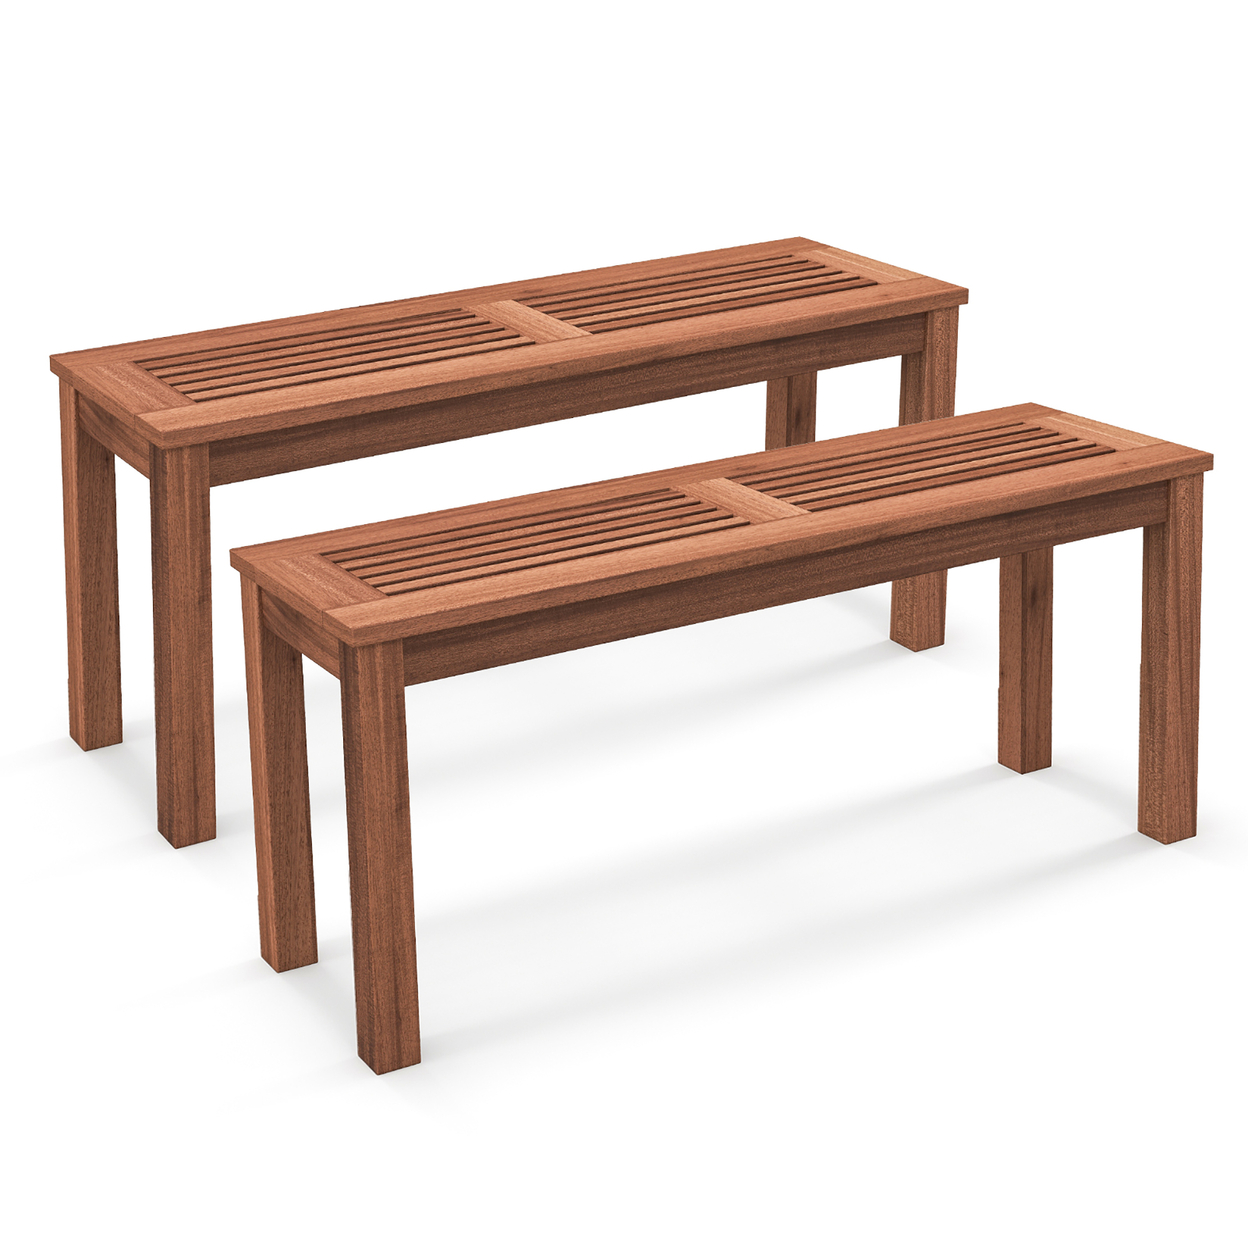 2 Pieces 2-Person Outdoor Bench Patio Bench W/ Slatted Seat Weather Resistant Solid Wood Frame